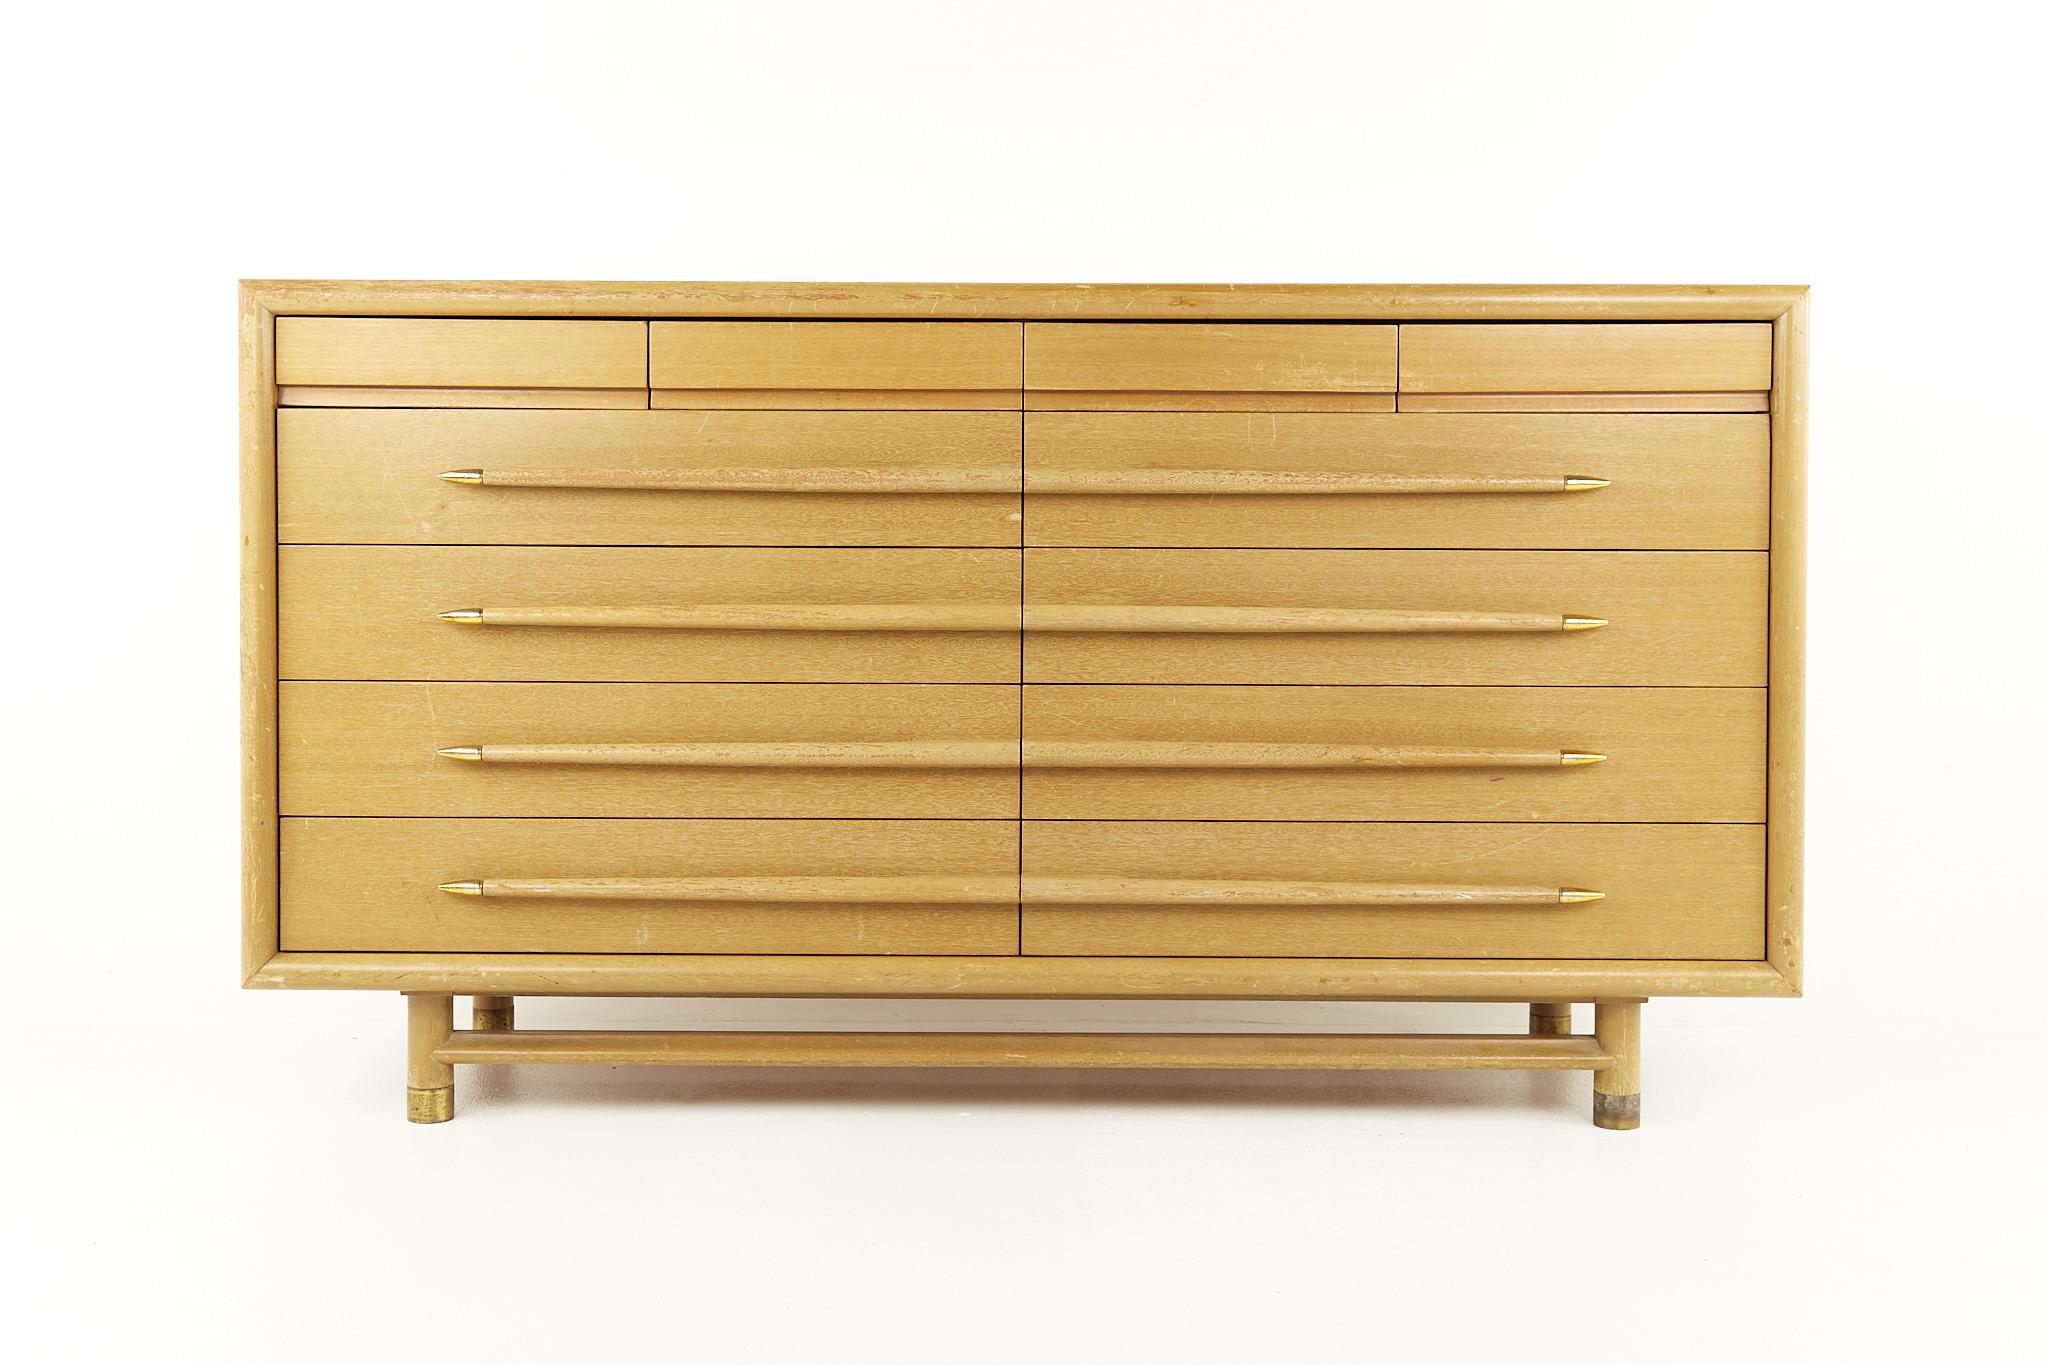 John Keal for brown saltman mid century lowboy dresser

This dresser measures: 66 wide x 19.75 deep x 35.5 inches high

All pieces of furniture can be had in what we call restored vintage condition. That means the piece is restored upon purchase